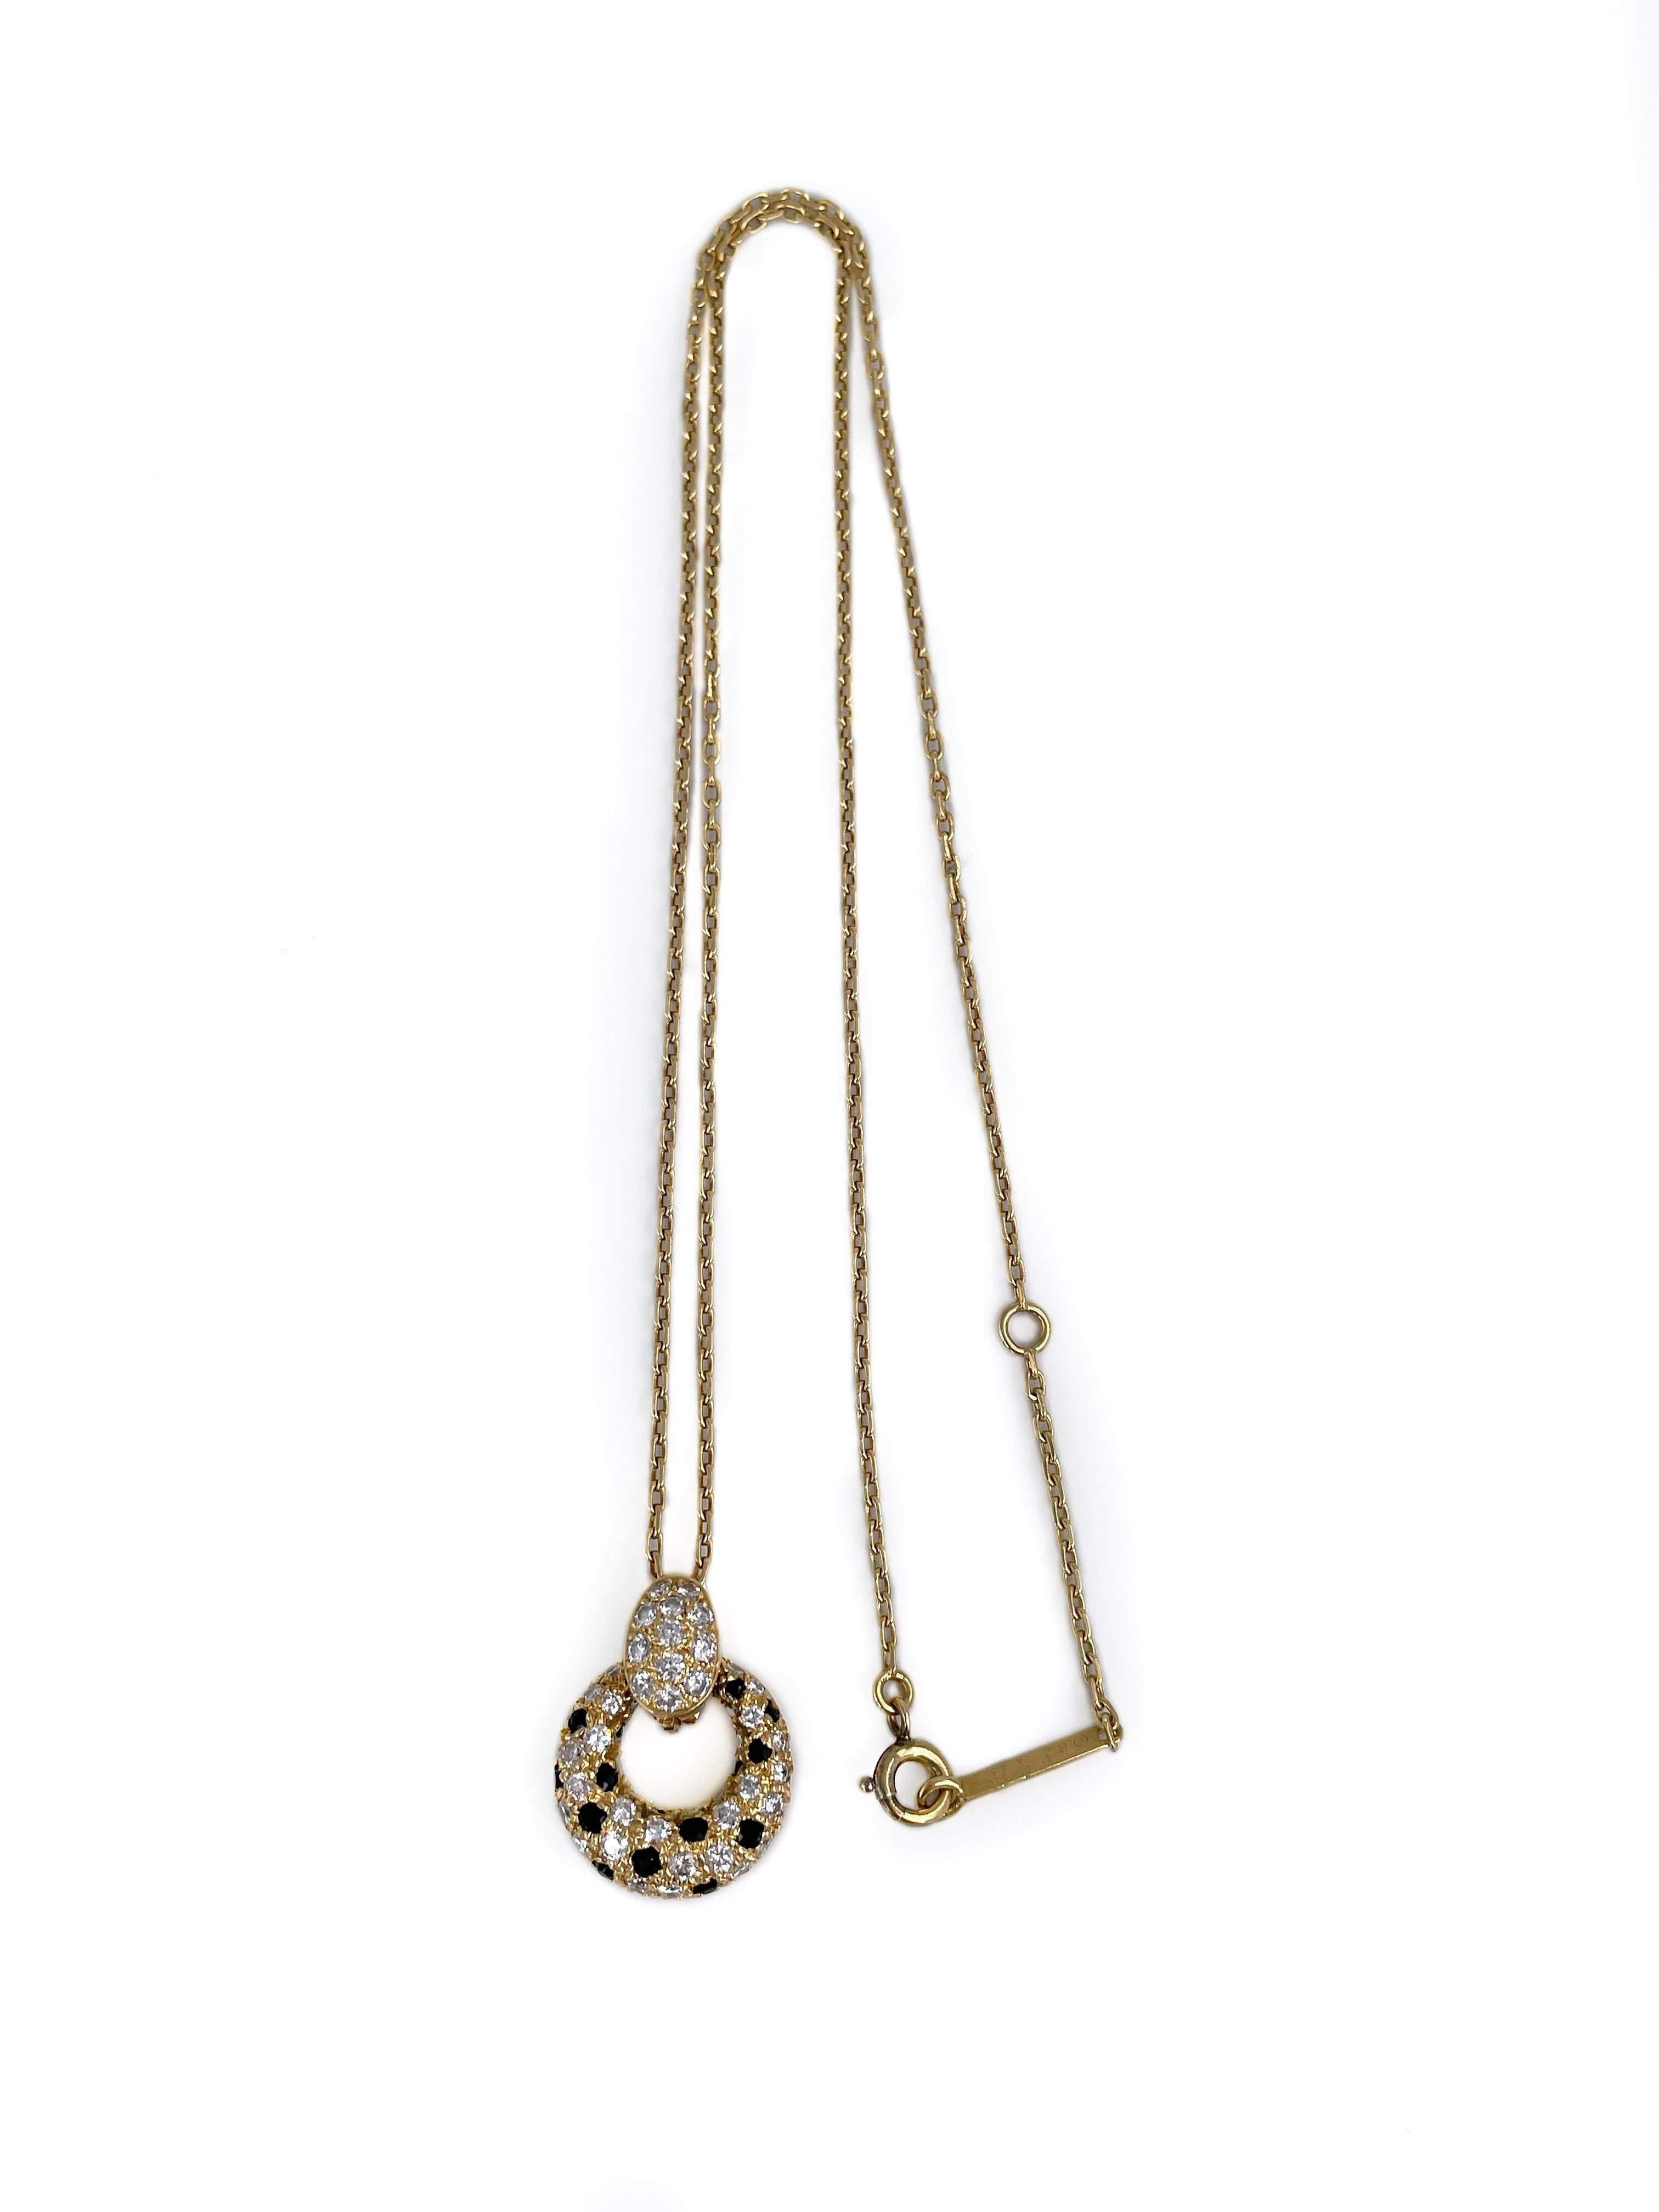 This is a vintage pendant with a chain designed by Van Cleef & Arpels in 1980s. It is crafted in 18K yellow gold. 

The piece features: 
- 49 diamonds (round brilliant cut, TW 1.2ct, RW+/RW, VVS-VS)
- 20 black chalcedonies

The pendant can be